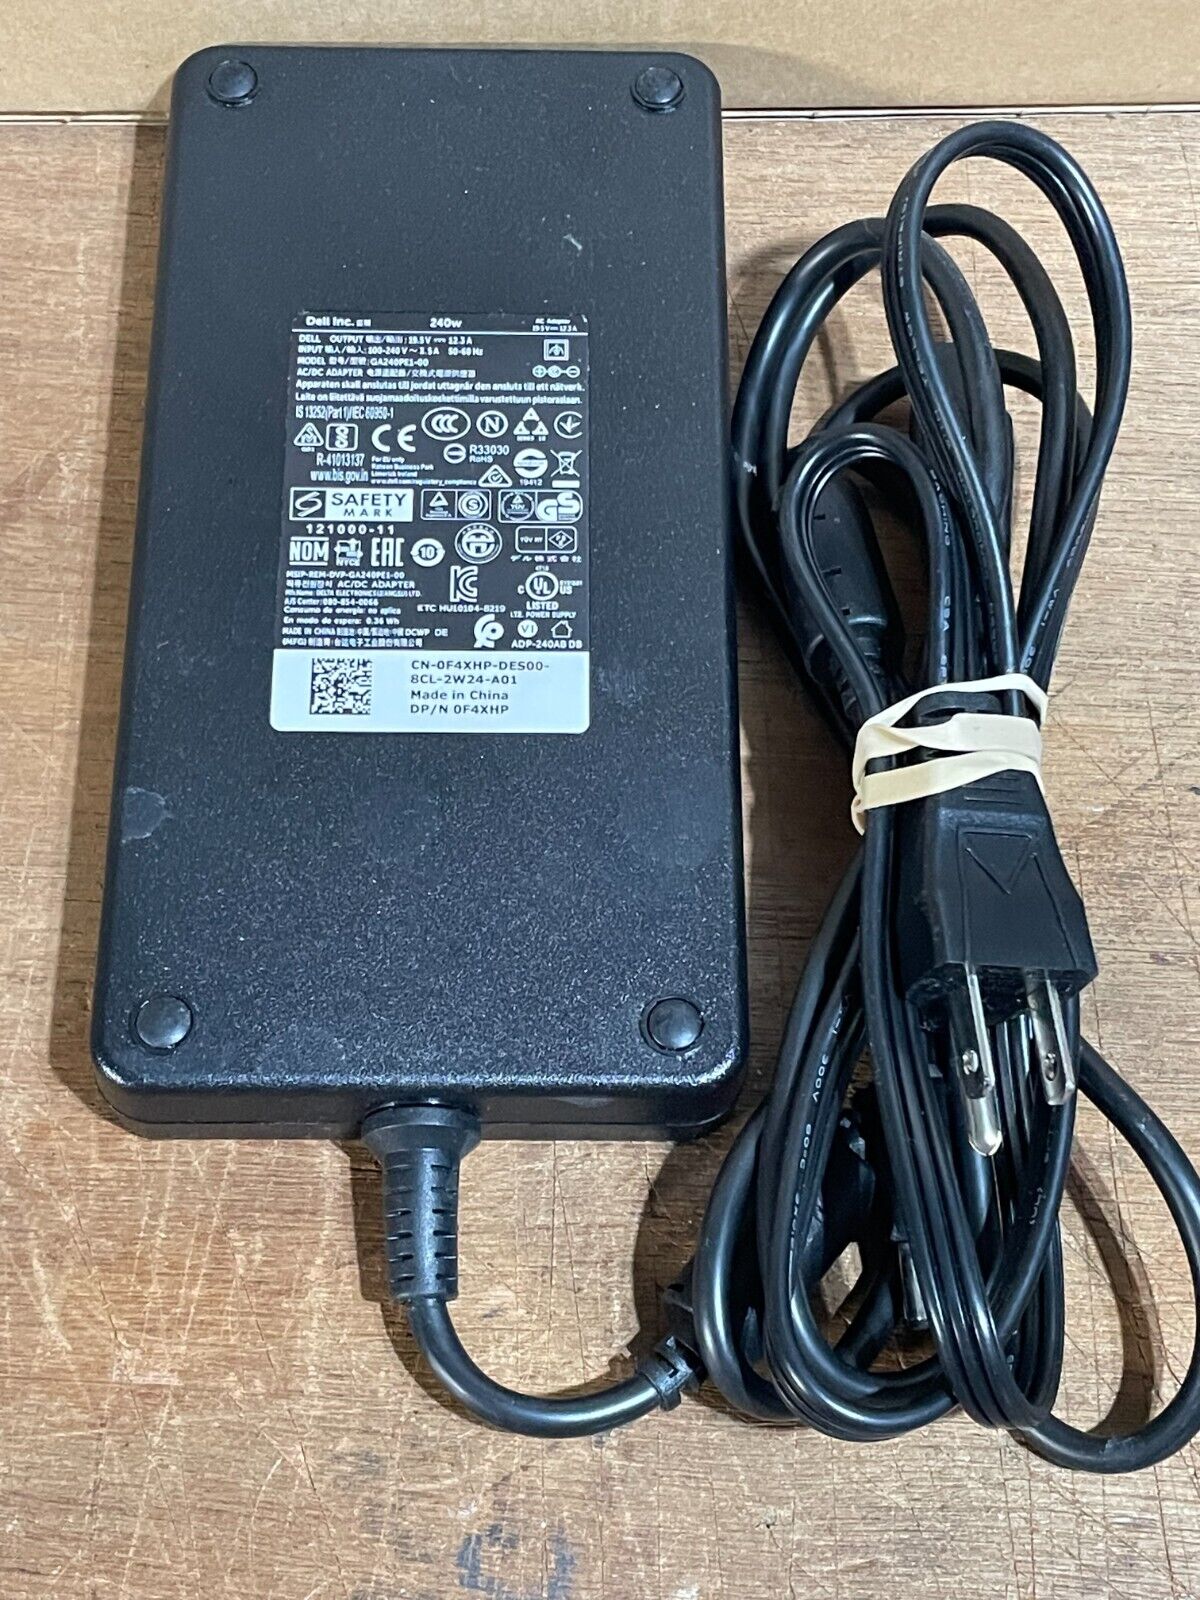 Genuine Dell 0F4XHP 240W Laptop AC Adapter - Fully Tested